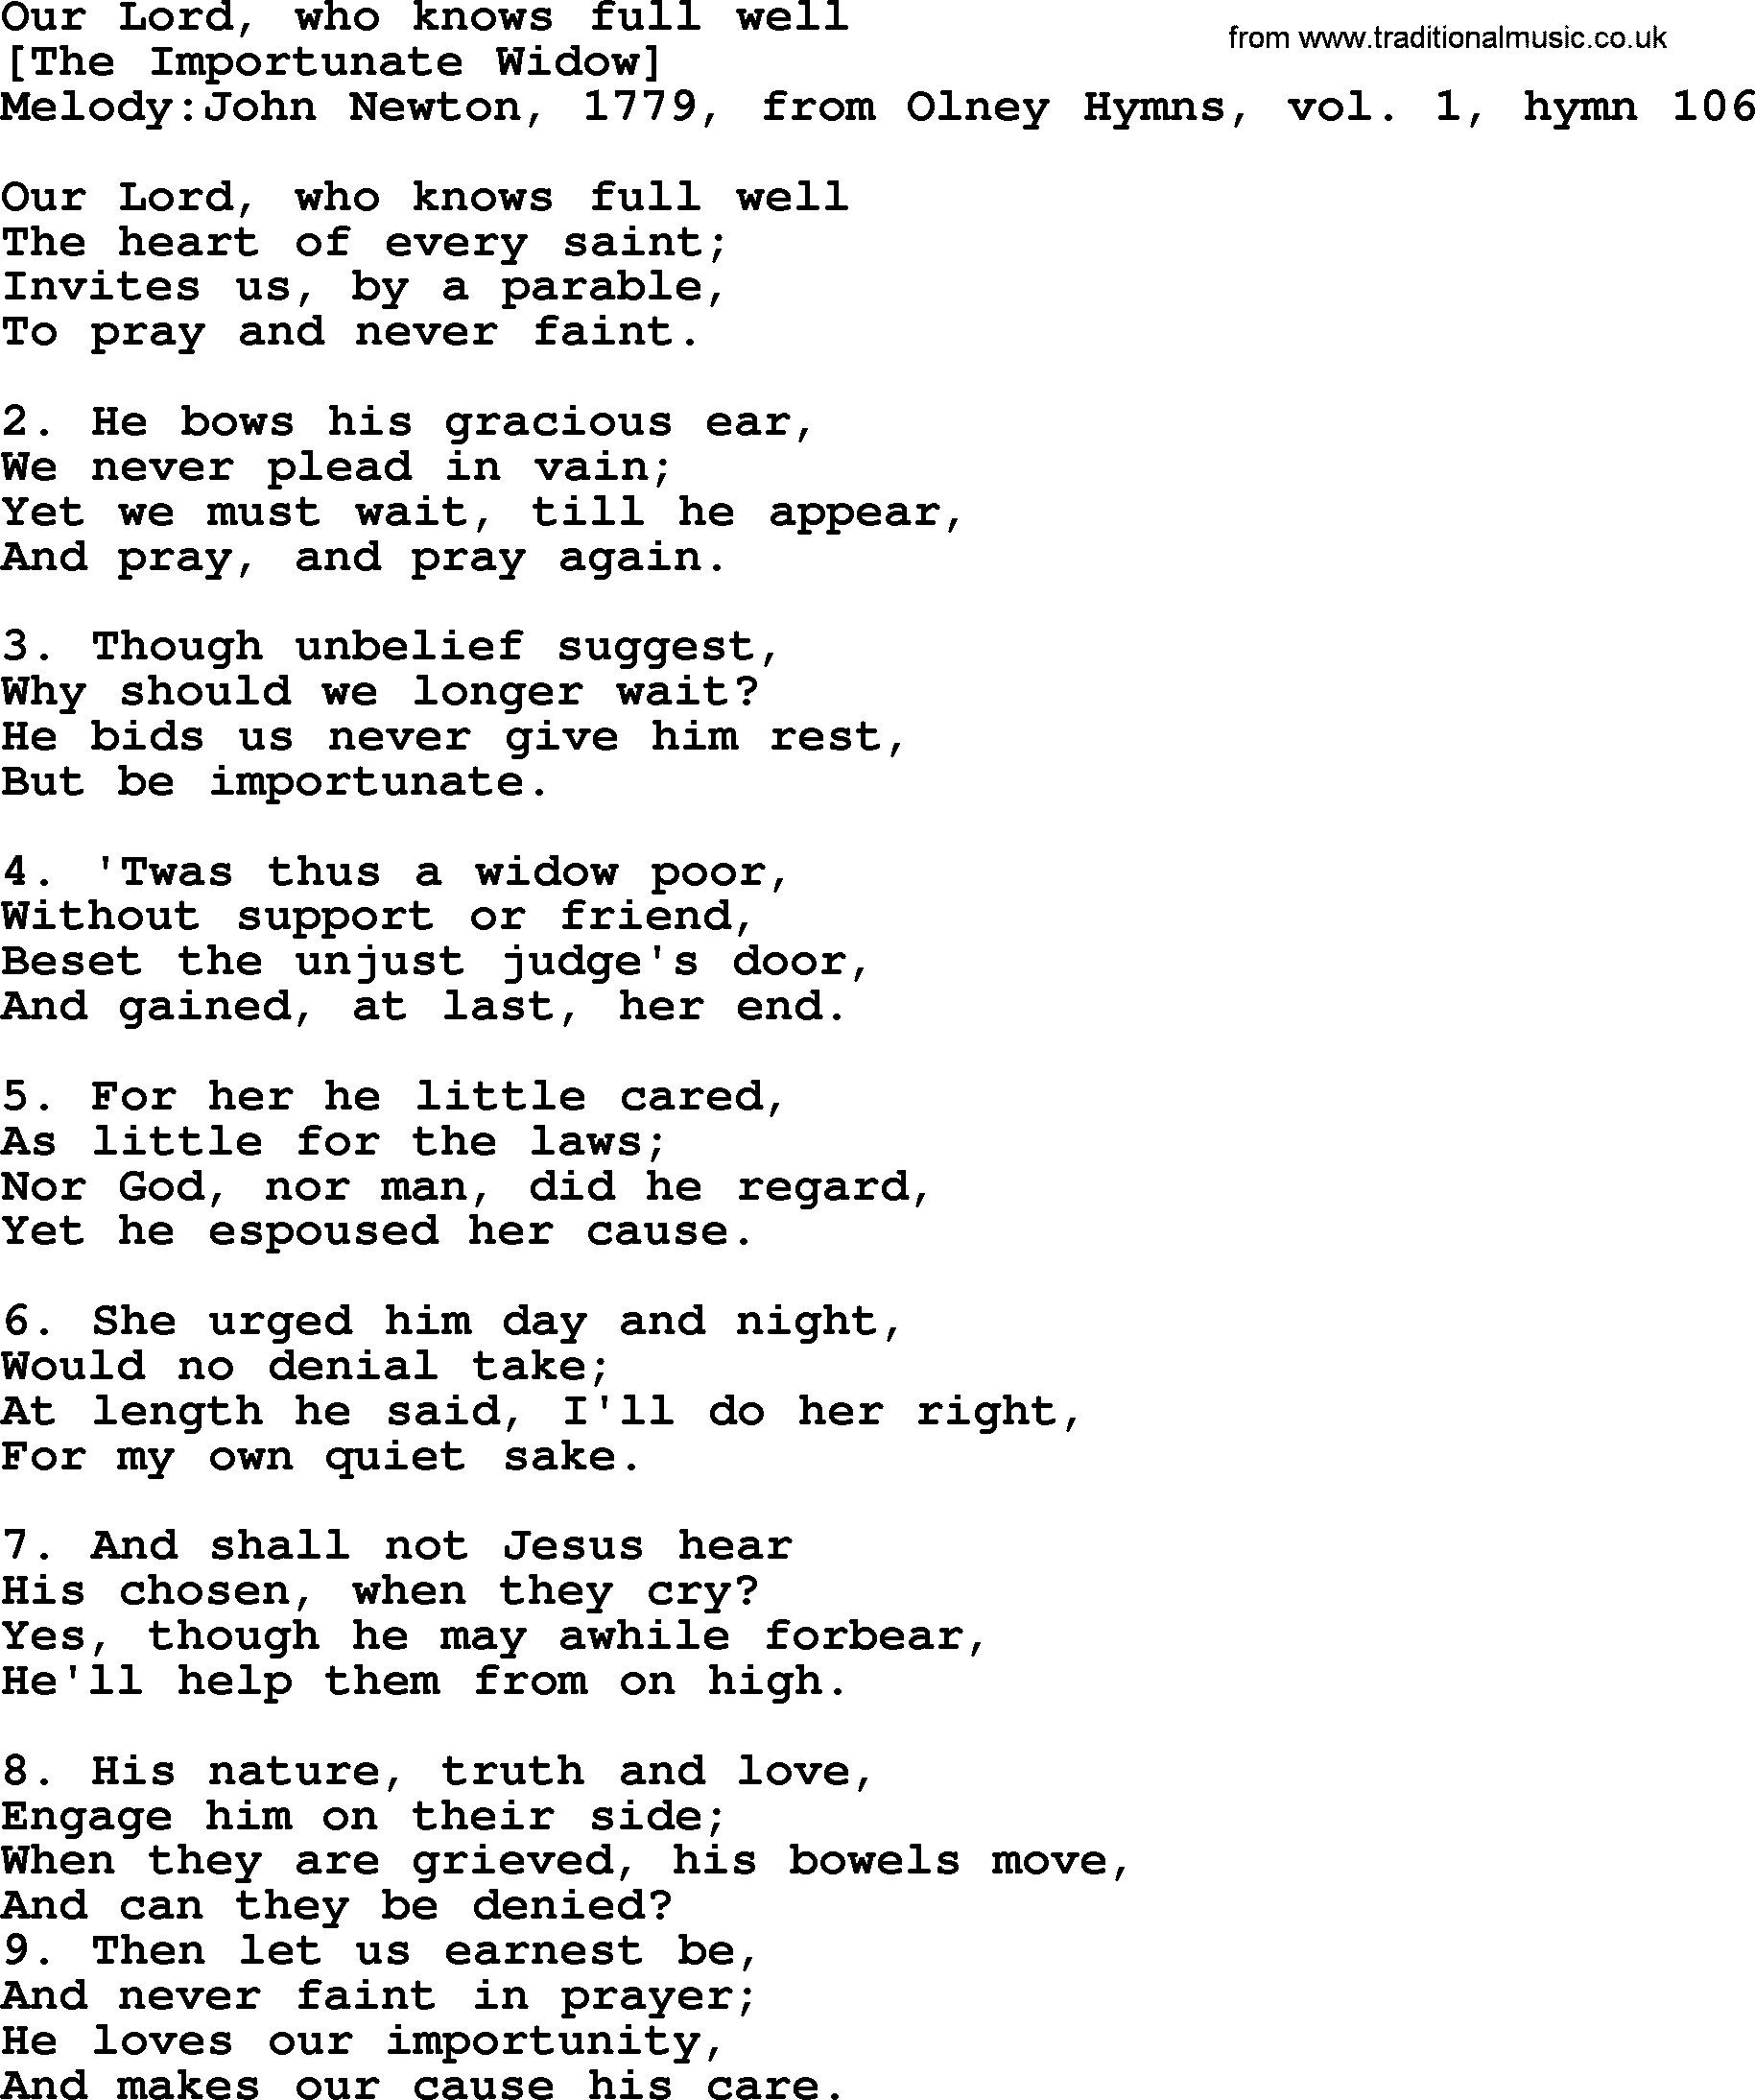 Old English Song: Our Lord, Who Knows Full Well lyrics